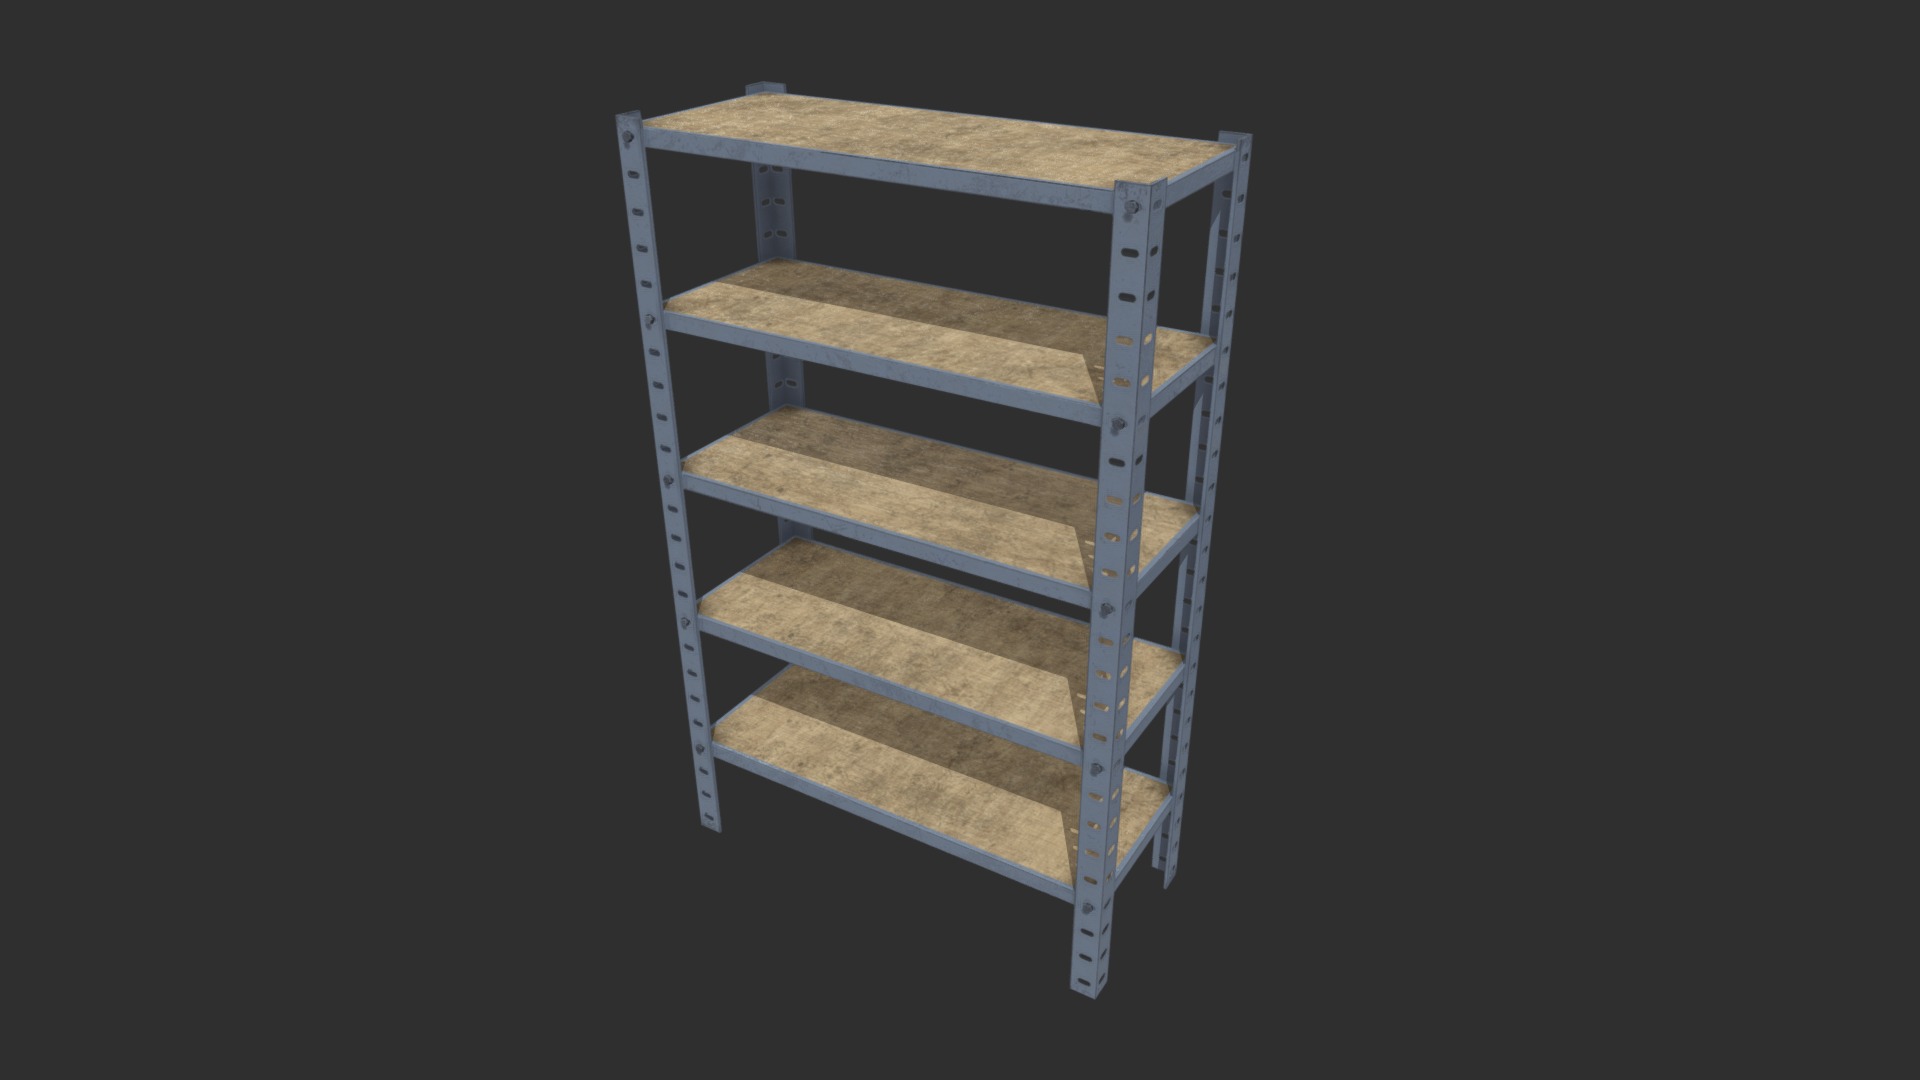 3D model Racking Shelf – Ready to Unity HDRP - This is a 3D model of the Racking Shelf - Ready to Unity HDRP. The 3D model is about a wooden bunk bed.